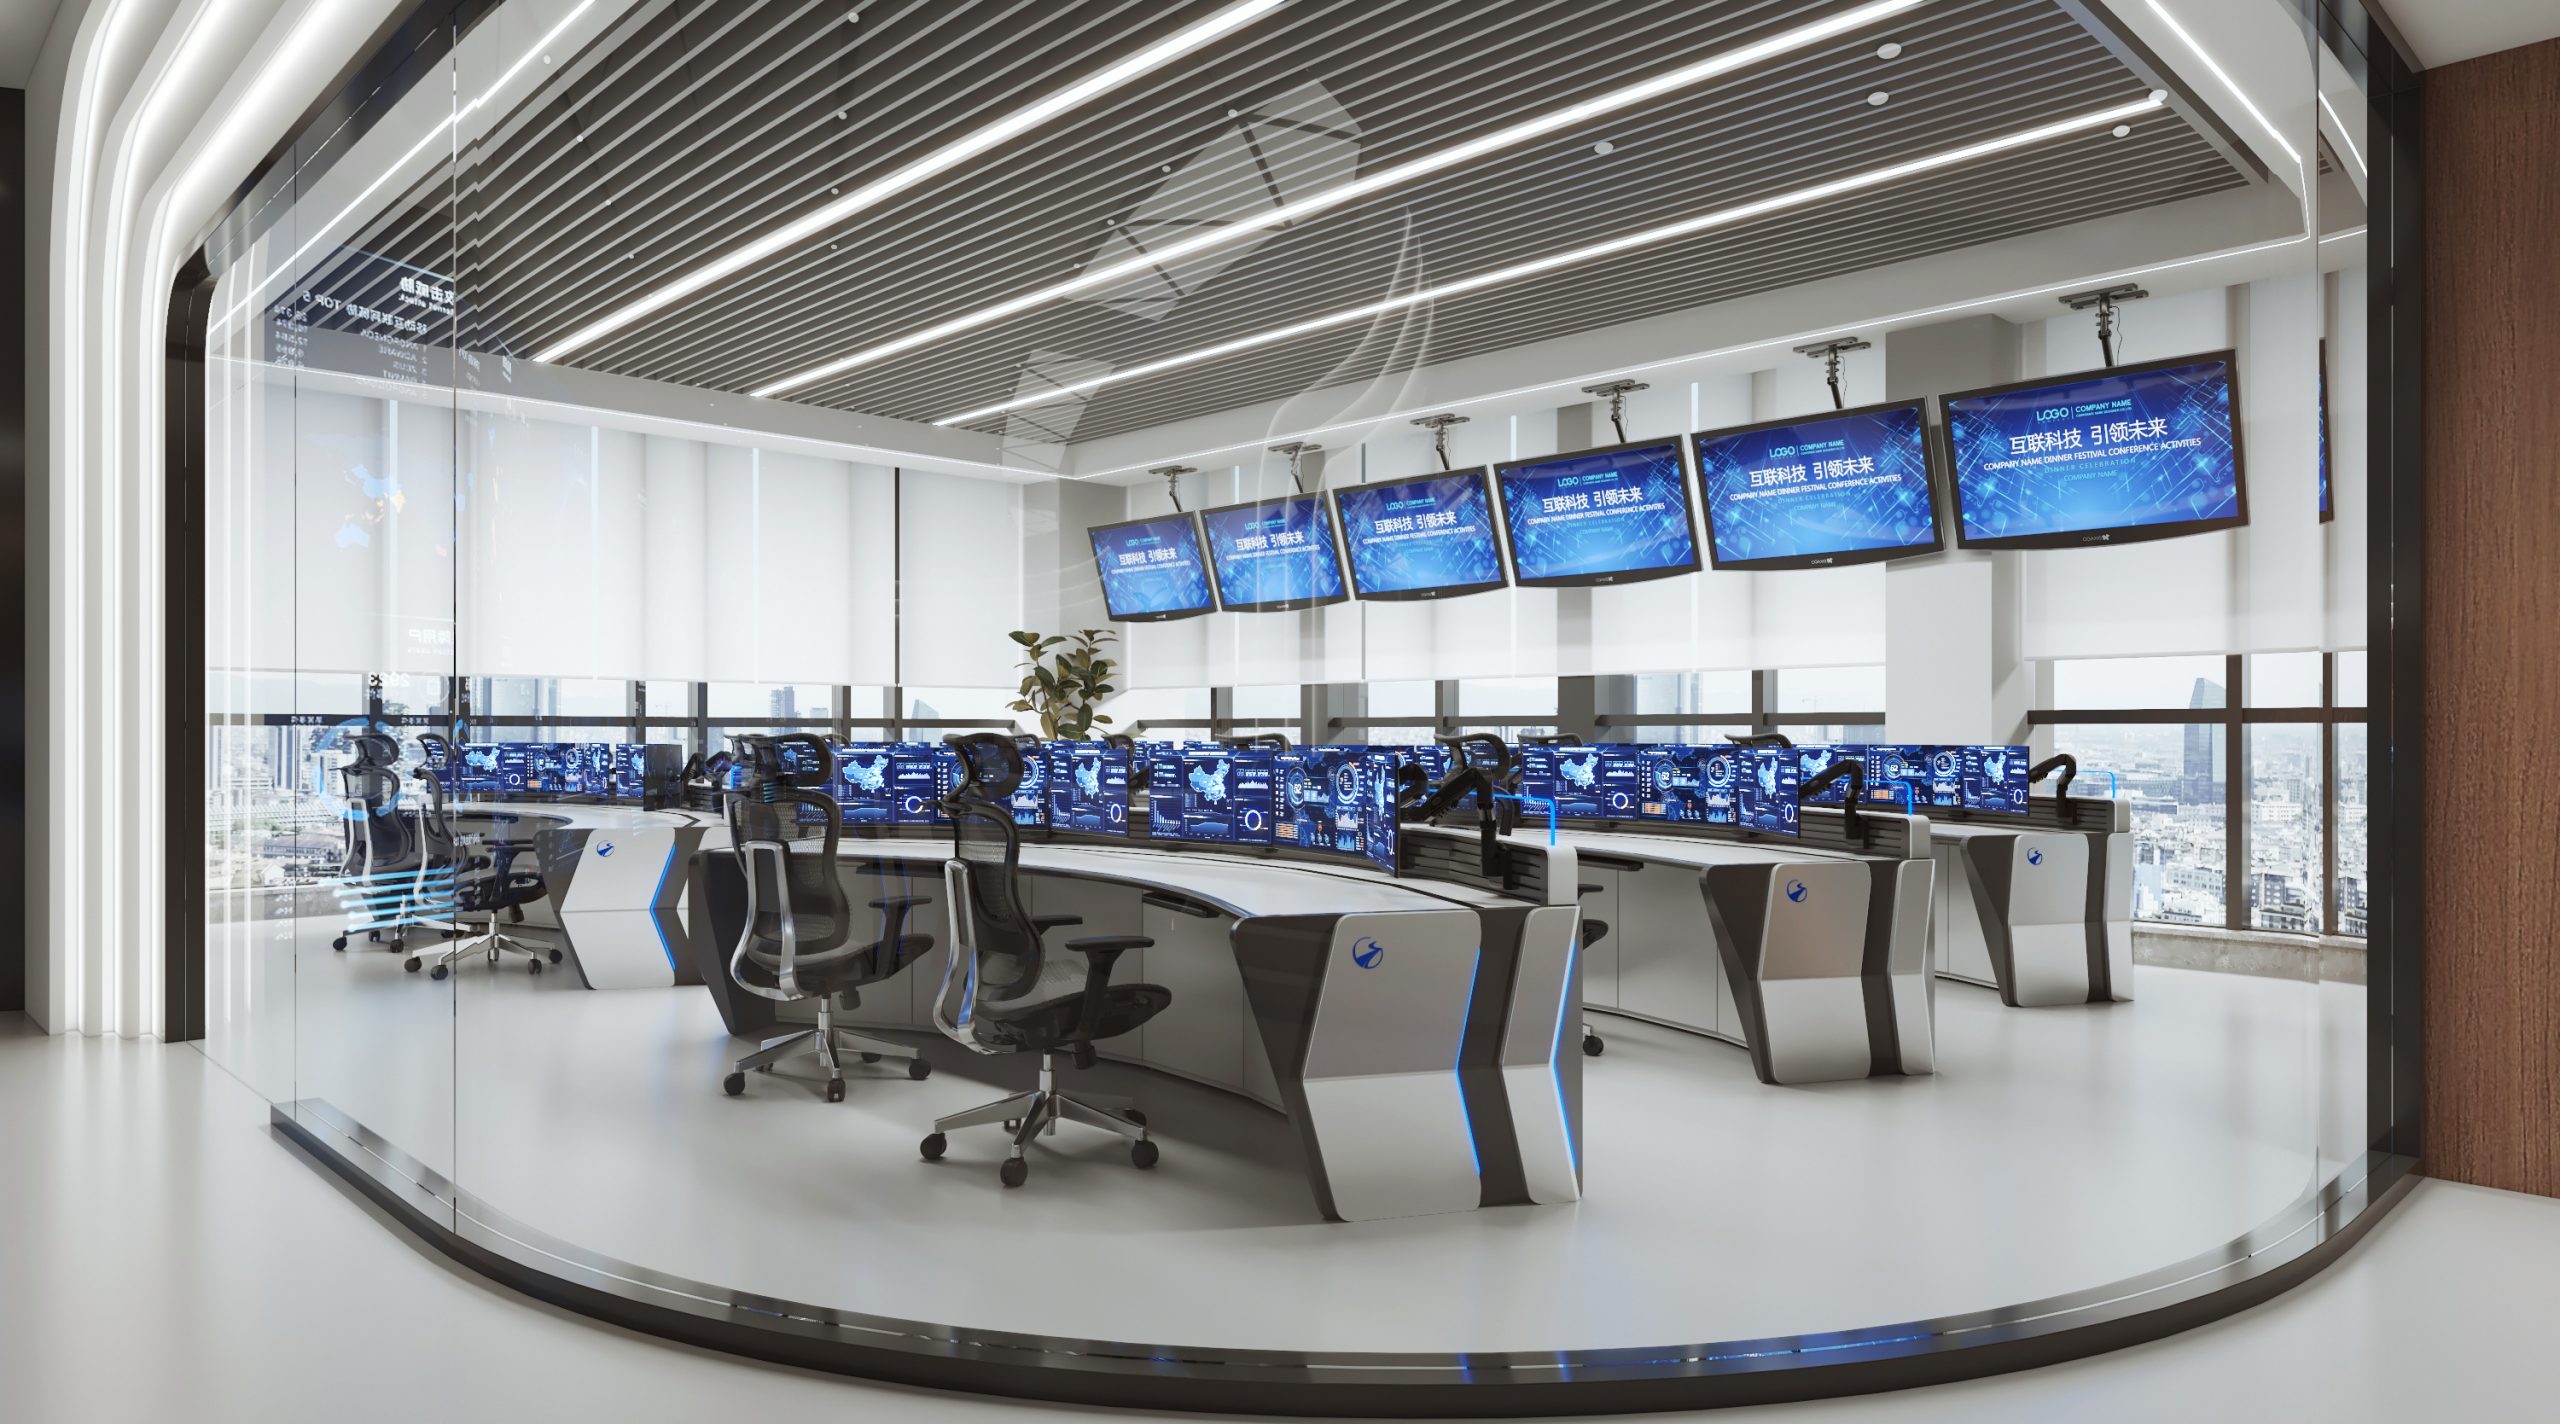 The benefits of an improved control room design